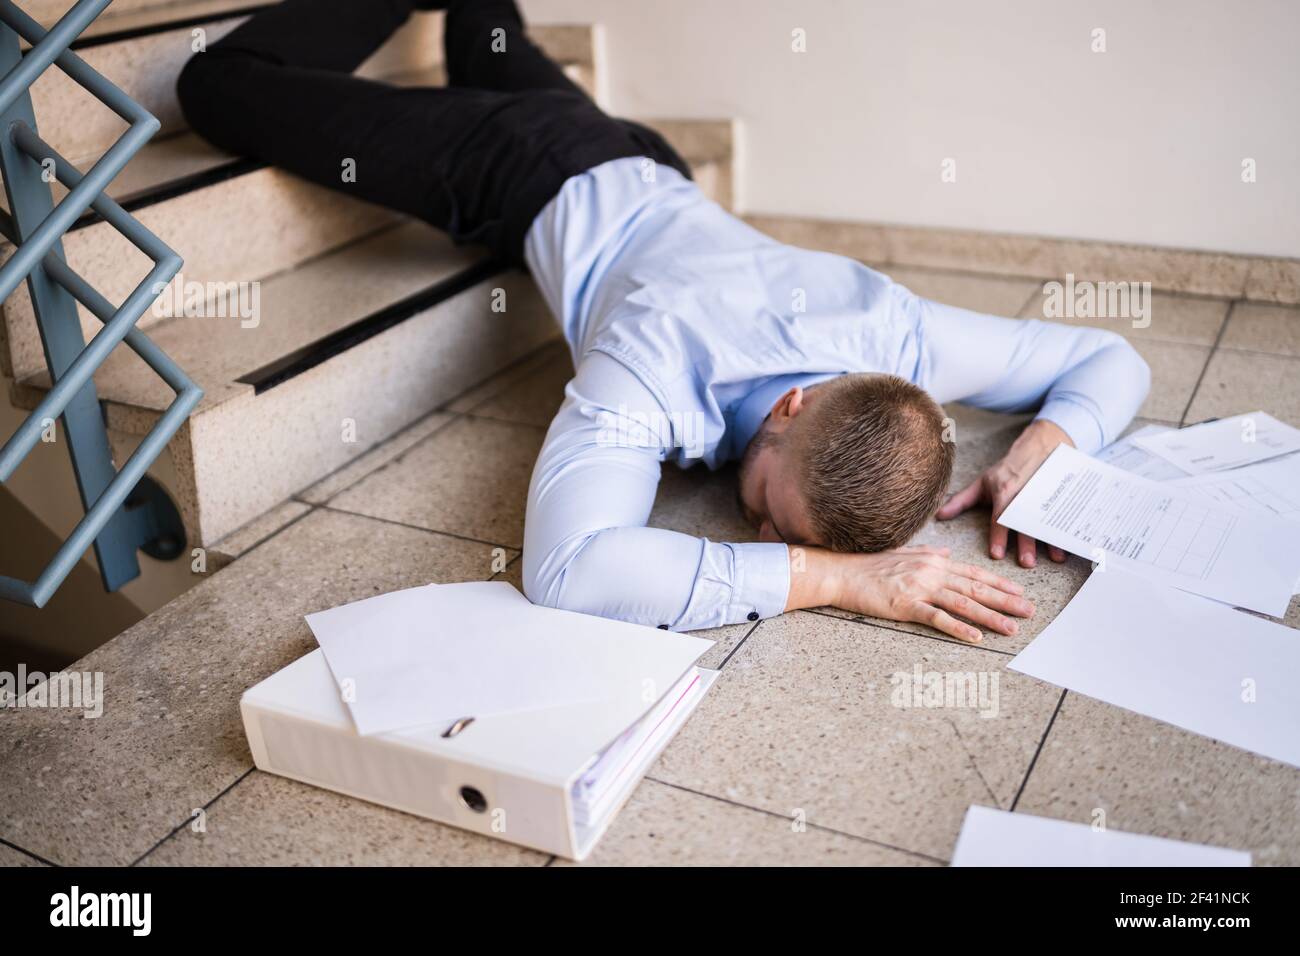 Slip Fall Accident. Fell Down On Stairs Stock Photo